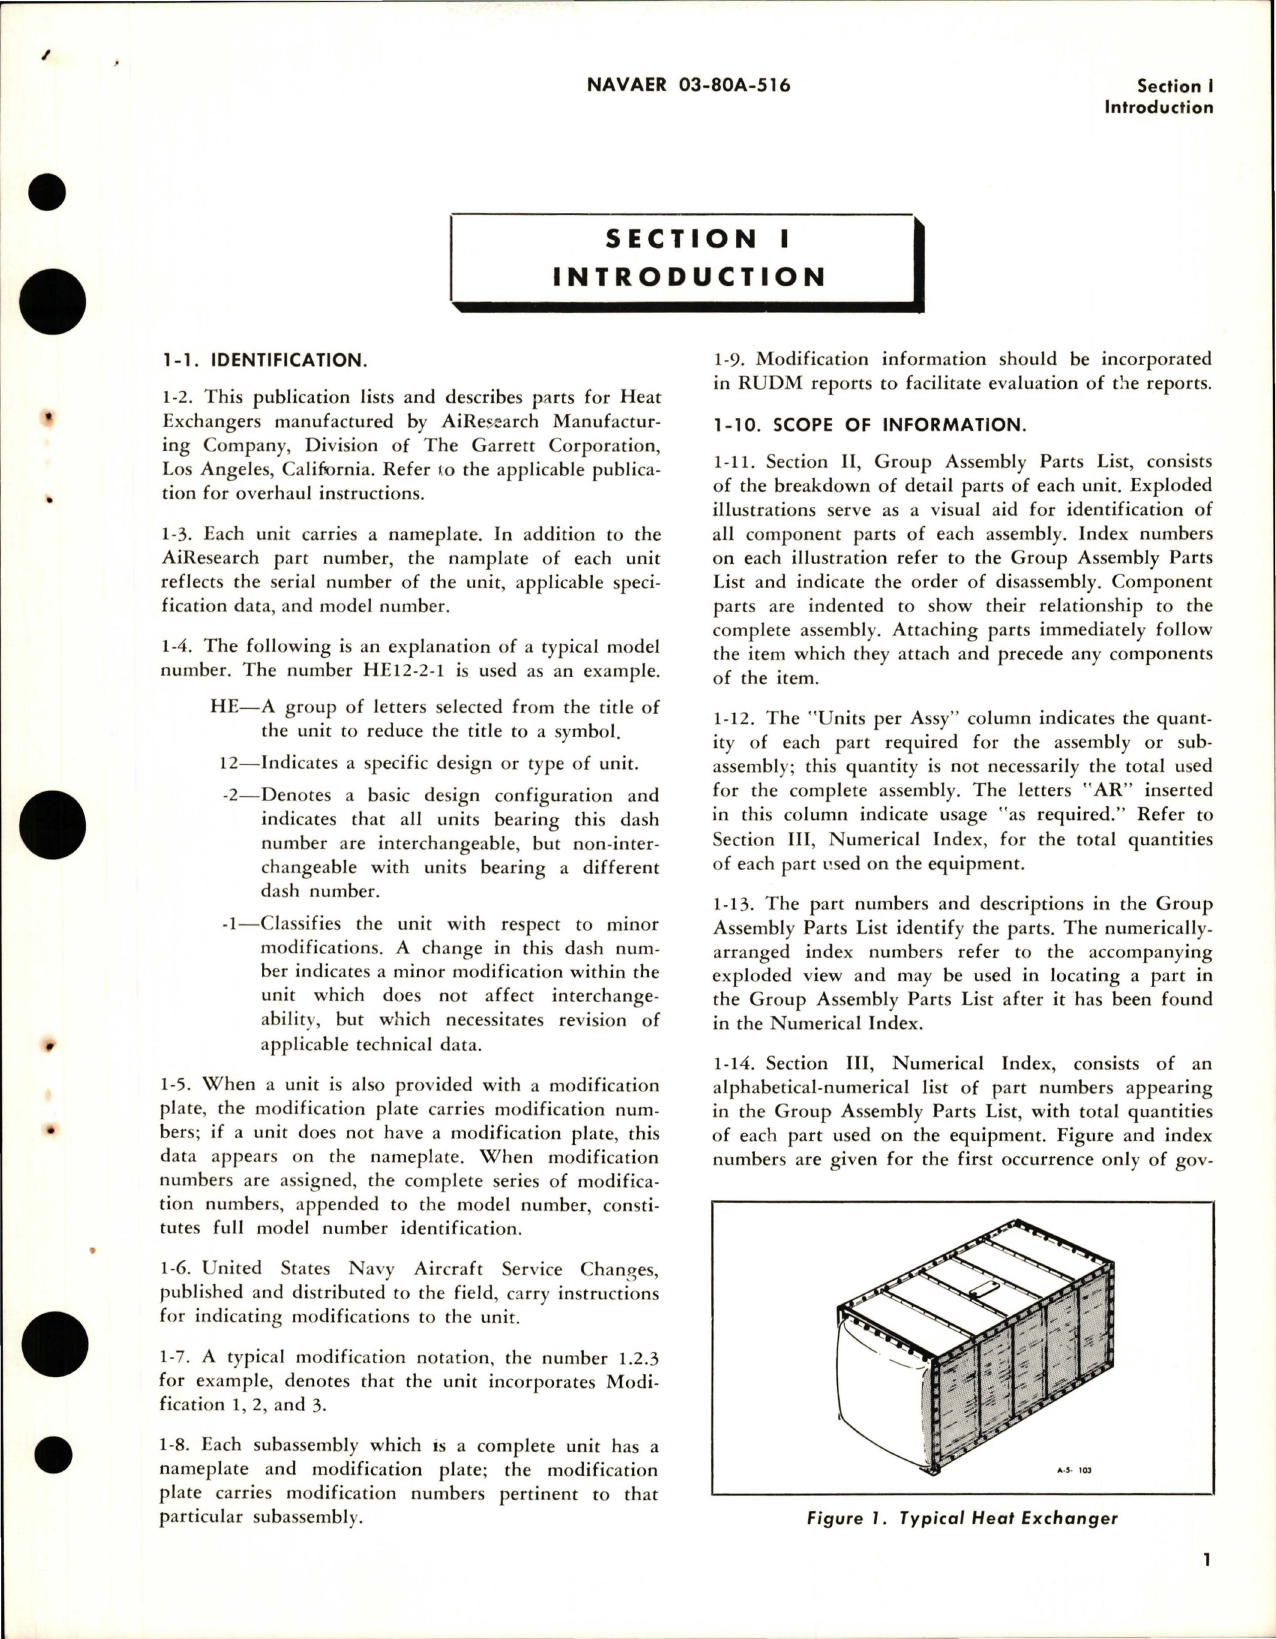 Sample page 5 from AirCorps Library document: Illustrated Parts Breakdown for Heat Exchangers